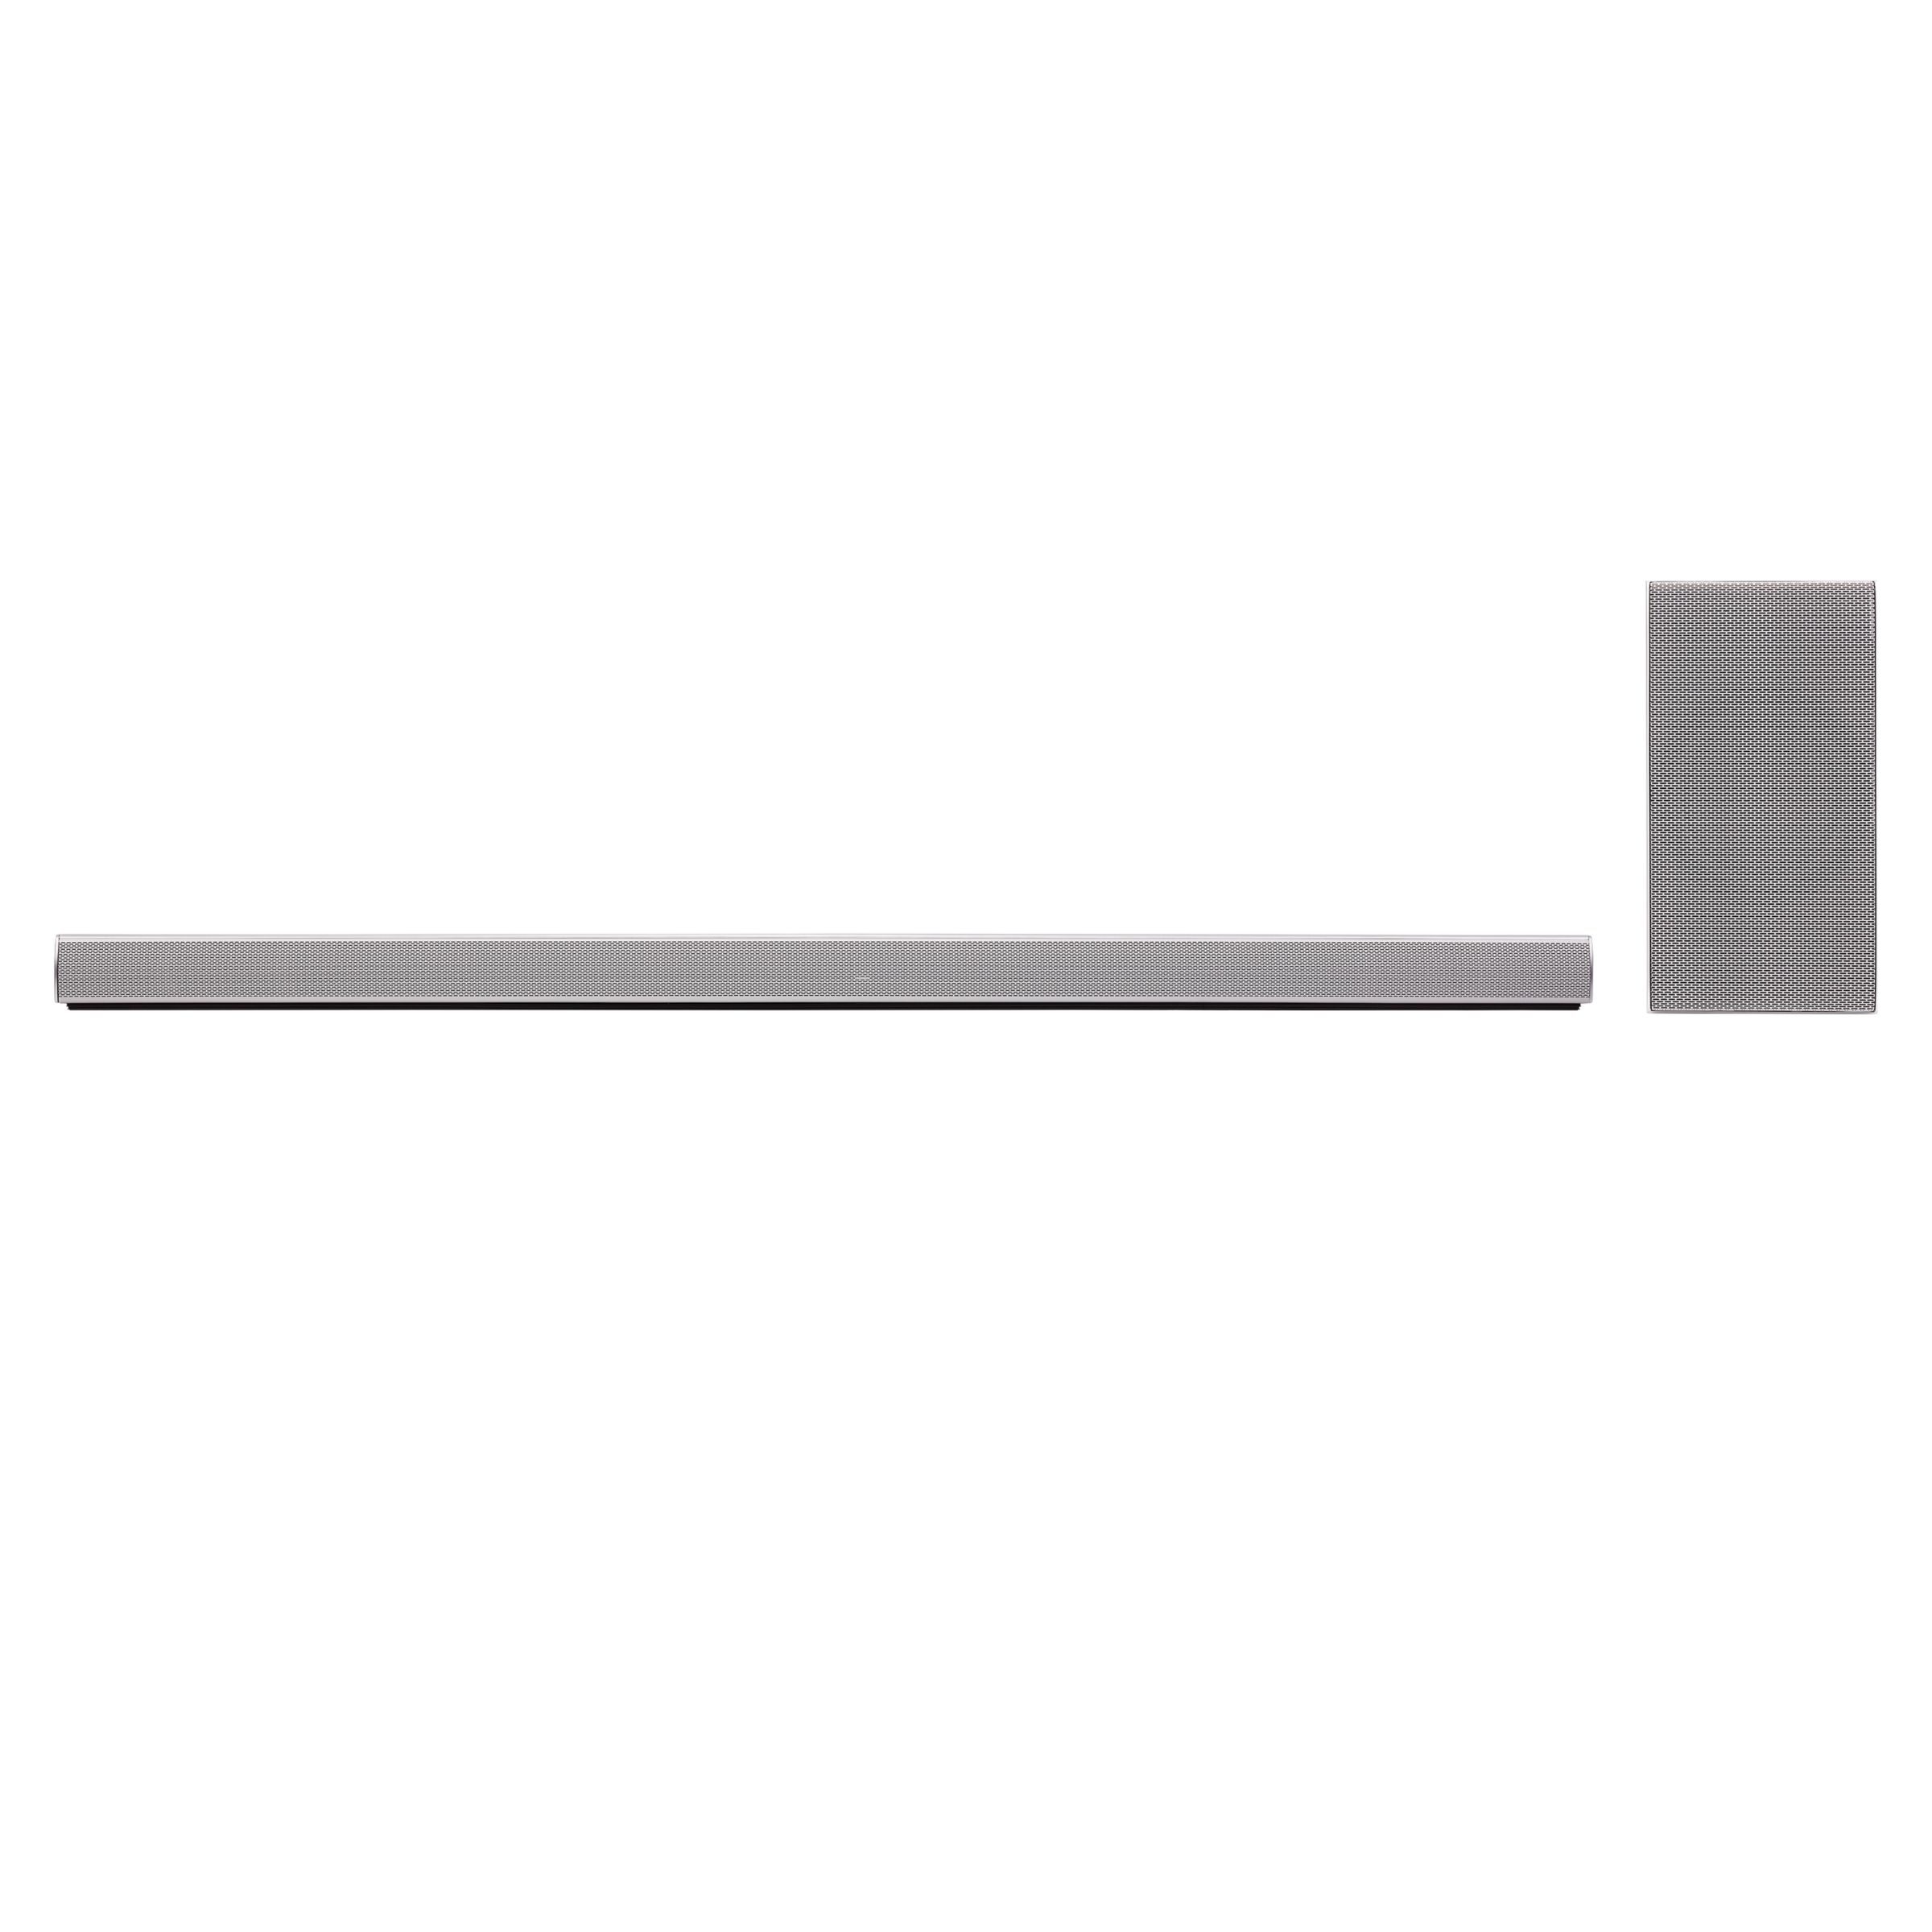 LG SH7 Wi-Fi & Bluetooth Sound Bar With Wireless Subwoofer and Adaptive Sound Control,